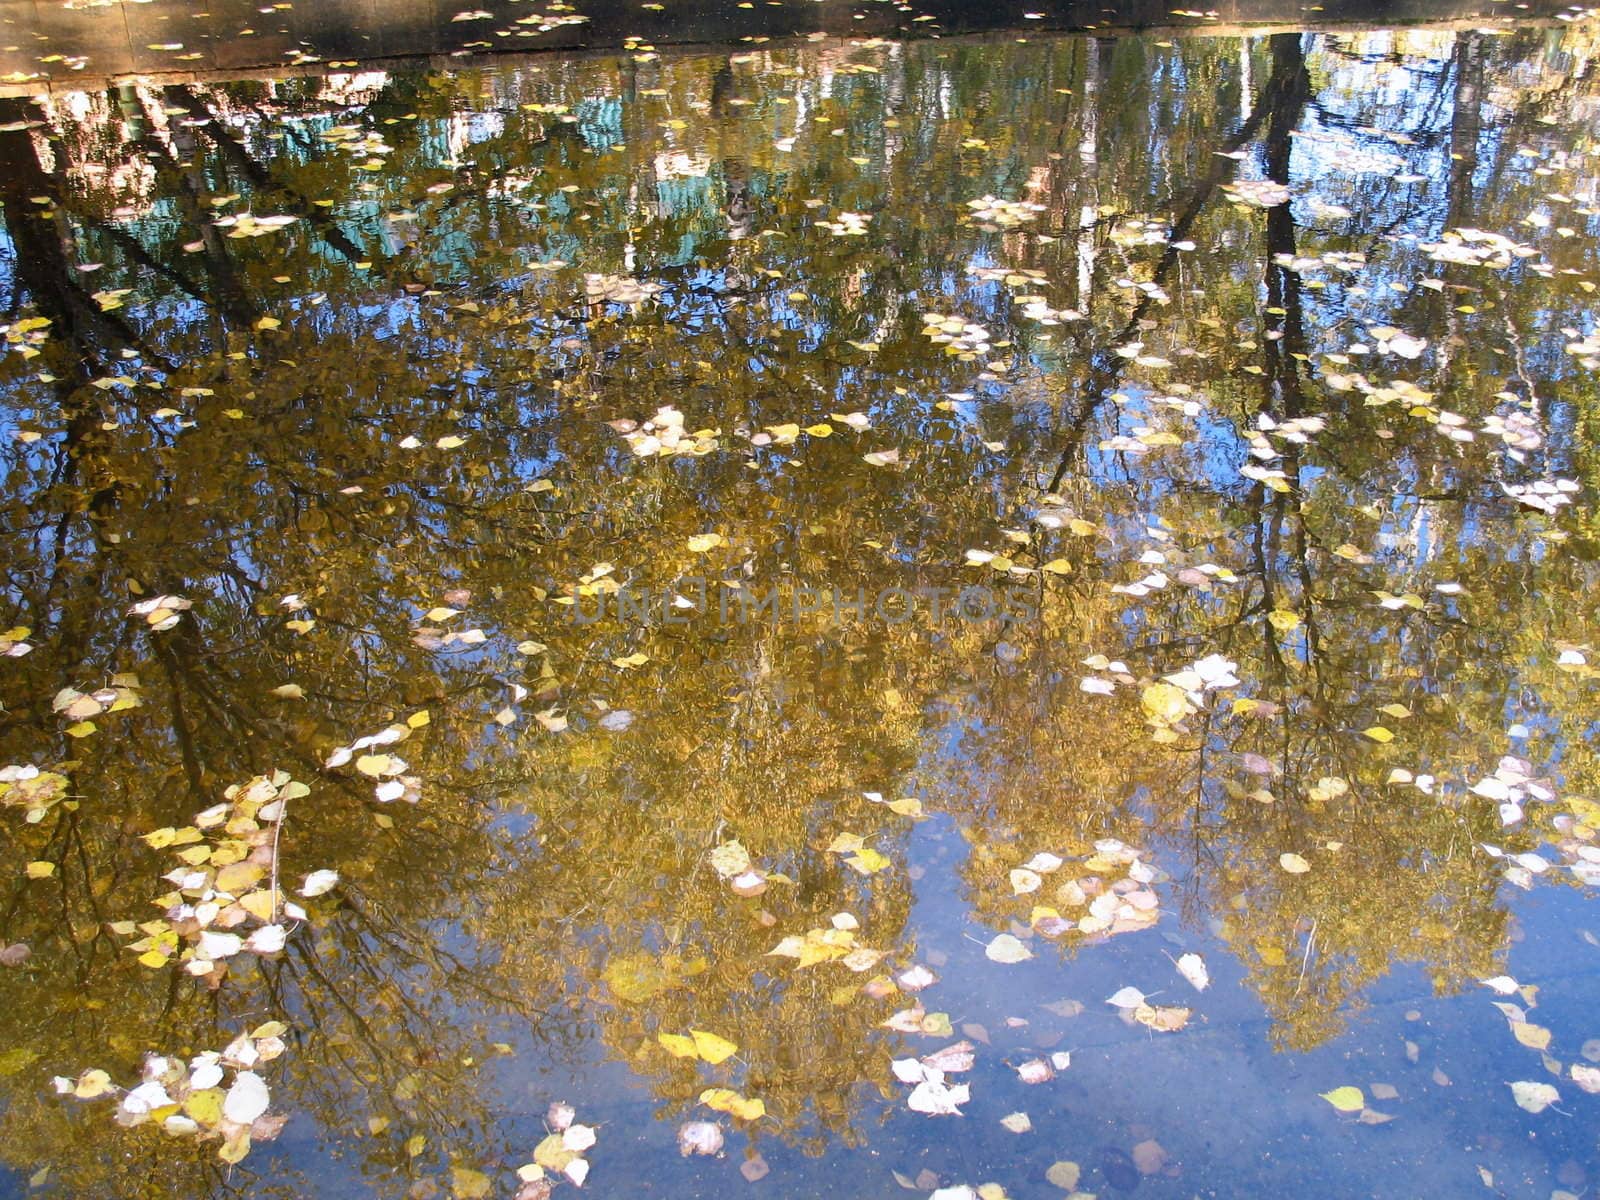 mirror, leaves, water, reflection, autumn, trees, lake, color, image, pond, nature, descriptive, tranquil, landscape, in, beauty, branches, day, yellow, fall, outdoors, scenics, woods, landscaped, colored, gold, scene, multi, shine, decoration, nobody, ethnicity, river, calm, silence, horizontal, history, palace, orange, light, maple, sun, traditional, indigenous, korea, pattern